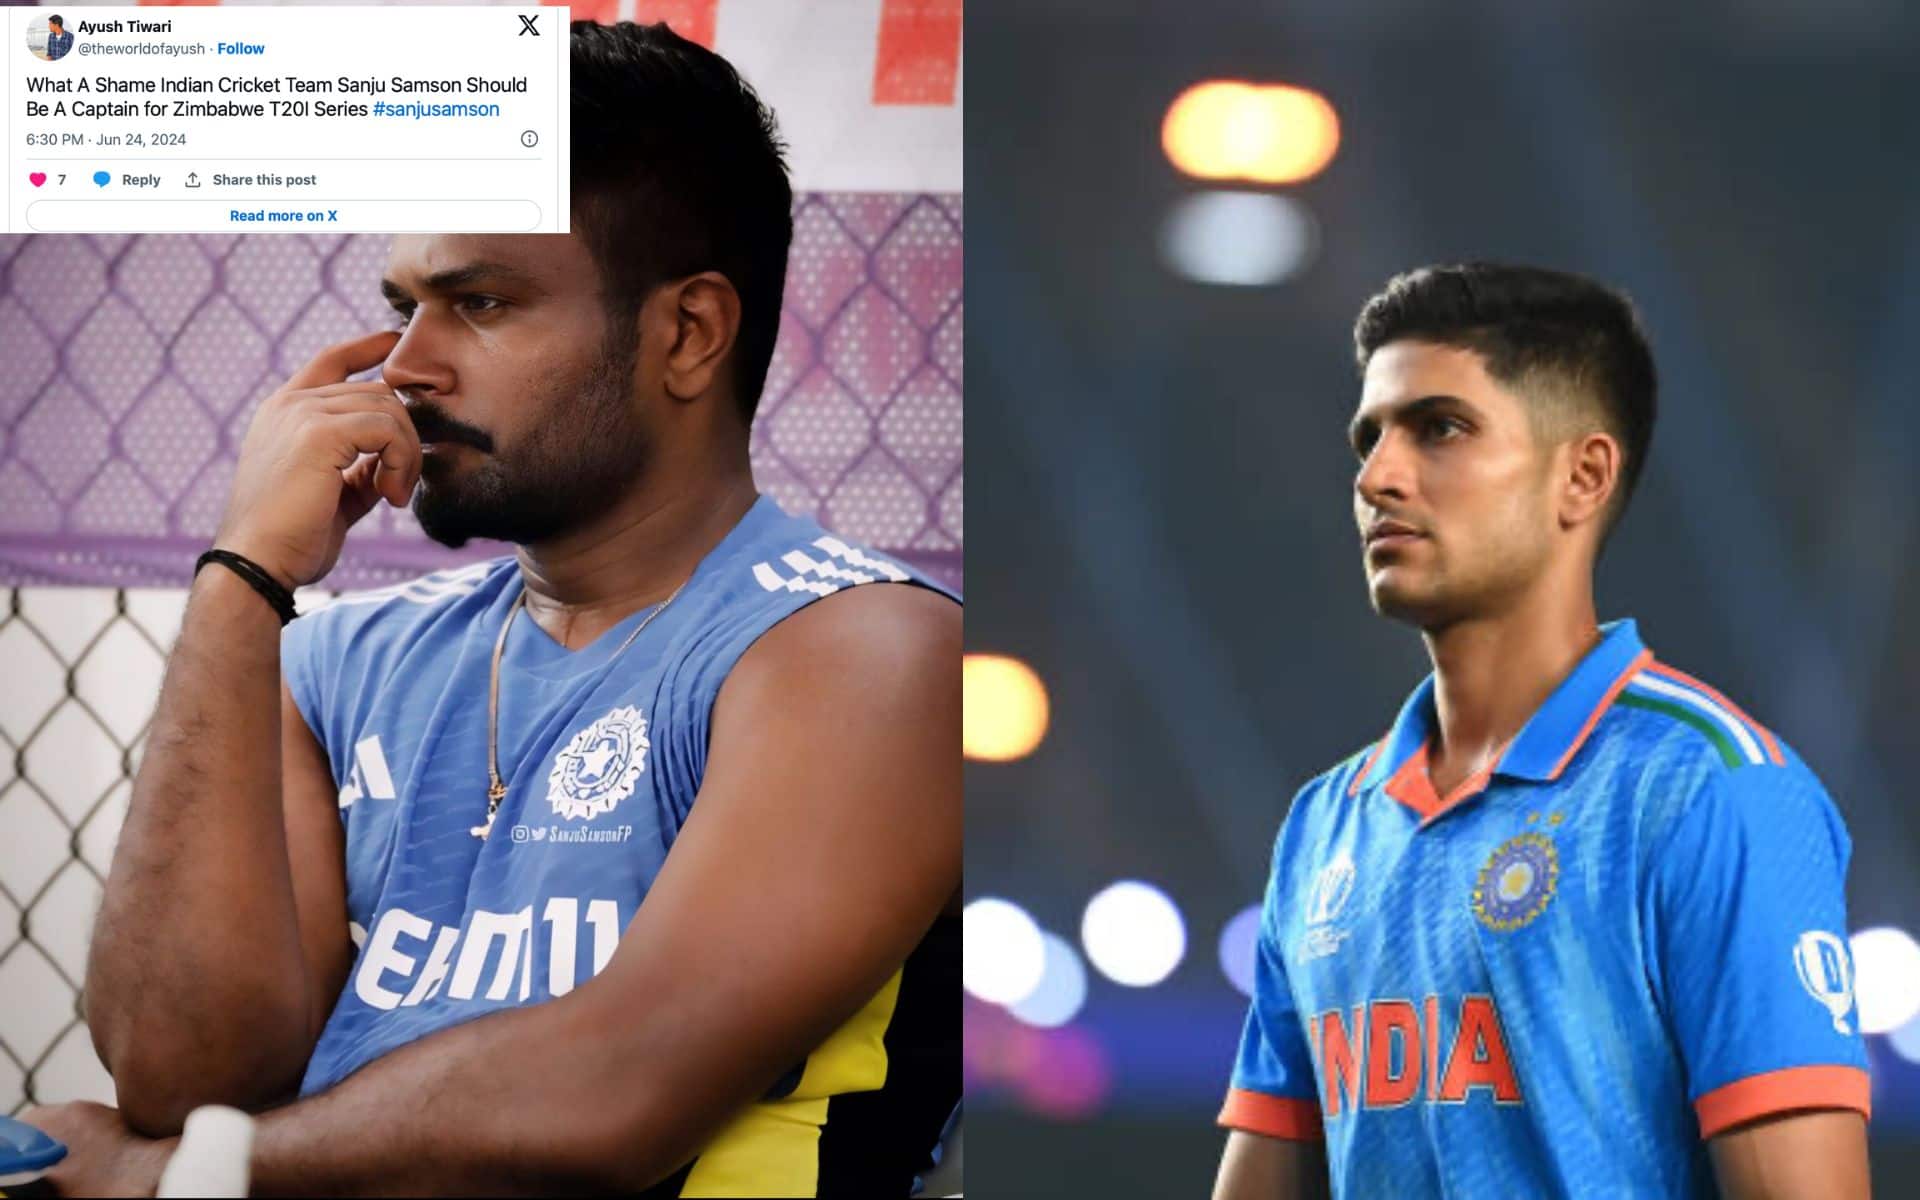 'Justice For Sanju Samson...' - Twitter Erupts After BCCI Appoints Gill As Captain For Zimbabwe Tour